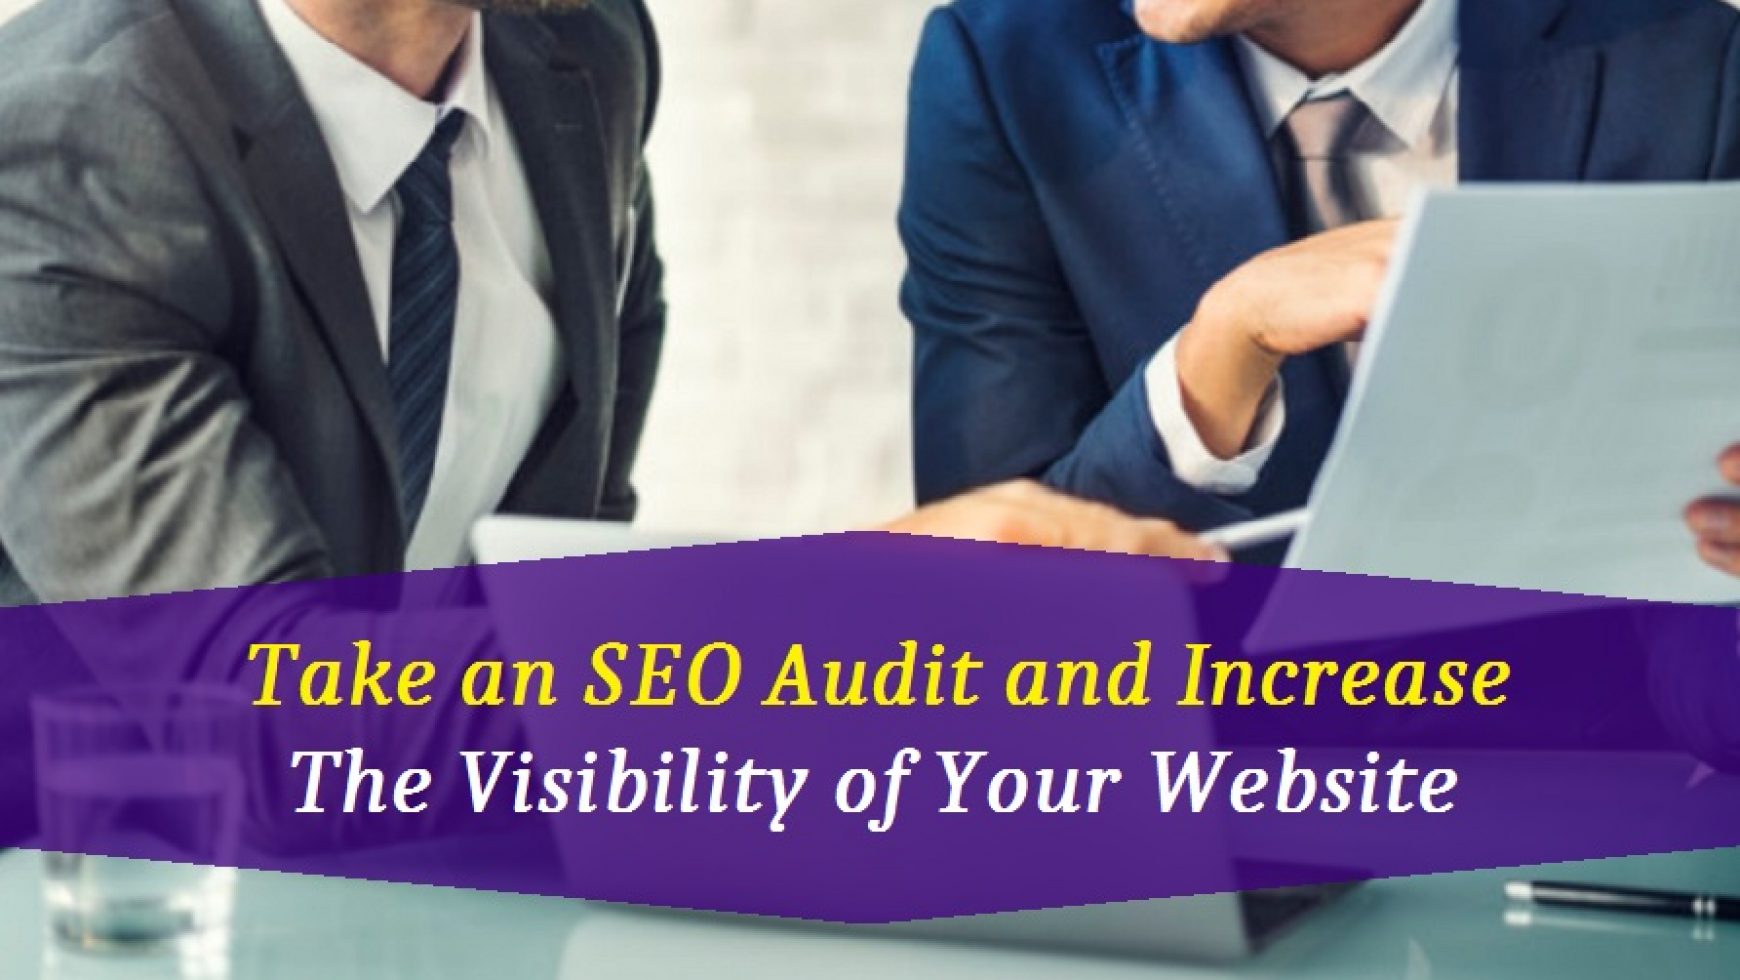 Take an SEO Audit and Increase the Visibility of Your Website